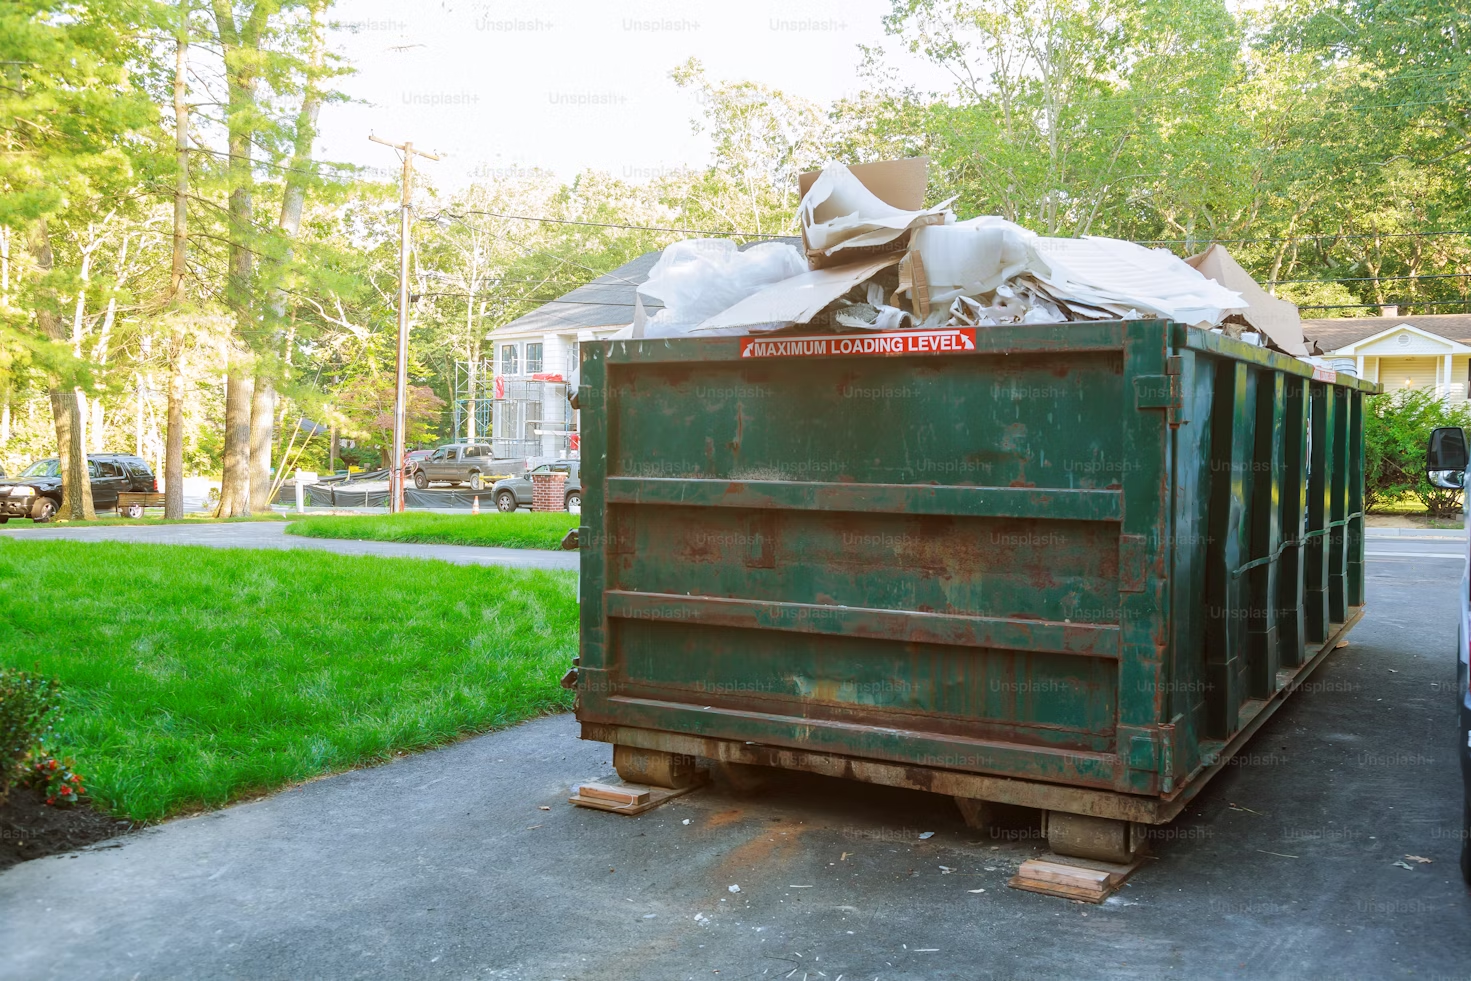 Top 5 Reasons to Rent a Dumpster for Your Next Home Improvement Project in Baltimore